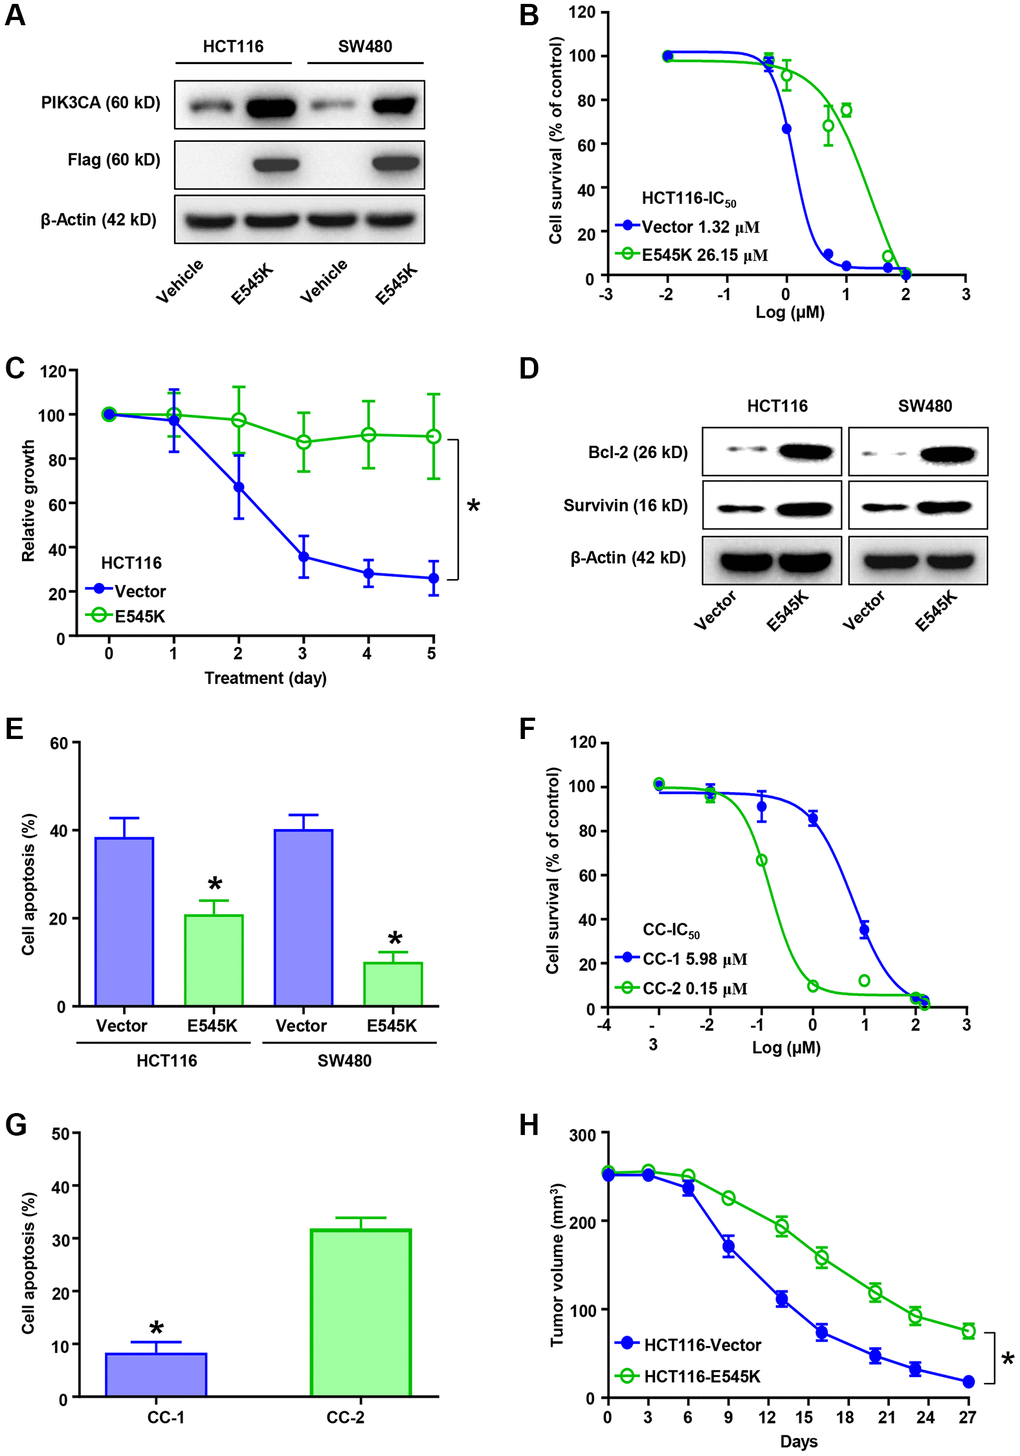 PIK3CA-E545K promotes L-OHP resistance in colorectal cancer cells. (A) Protein levels of PIK3CA, Flag and β-actin in PIK3CA-E545K infected HCT116 and SW480 cells were analyzed by Western blotting. β-actin was used as loading control. (B) IC50 of L-OHP was determined by treating PIK3CA-E545K or empty vector infected HCT116 cells in a dose dependent manner. (C) Infected HCT116/E545K cells were challenged with L-OHP (2 μM), which showed increased resistance to L-OHP than the control. (D) Western blot analysis of Bcl-2 and Survivin expression in PIK3CA-E545K infected HCT116 and SW480 cells following 2 μM L-OHP treatment. (E) The percentage of cell apoptosis activation after 48 hours of 2 μM L-OHP exposure was measured by FITC-Annexin V/PI double staining of flow cytometry. (F) IC50 of primary colon cancer cells, CC-1 and CC-2, were analyzed with cell viability with gradient L-OHP treatment. Their IC50 were 5.98 μM and 0.15 μM, respectively. (G) Cell apoptosis percentage of CC-1/2 with L-OHP treatment was analyzed as (E). Results are representative of at least three independent experiments. (H) Effect of PIK3CA-E545K expression in L-OHP resistance in vivo was analyzed with subcutaneously injected HCT116 cells (n = 6 each group). L-OHP (10 mg/kg) was intraperitoneally administrated once every 3 days. Xenograft tumor volumes were measured with a caliper. The tumor growth inhibition was calculated. p-values *.